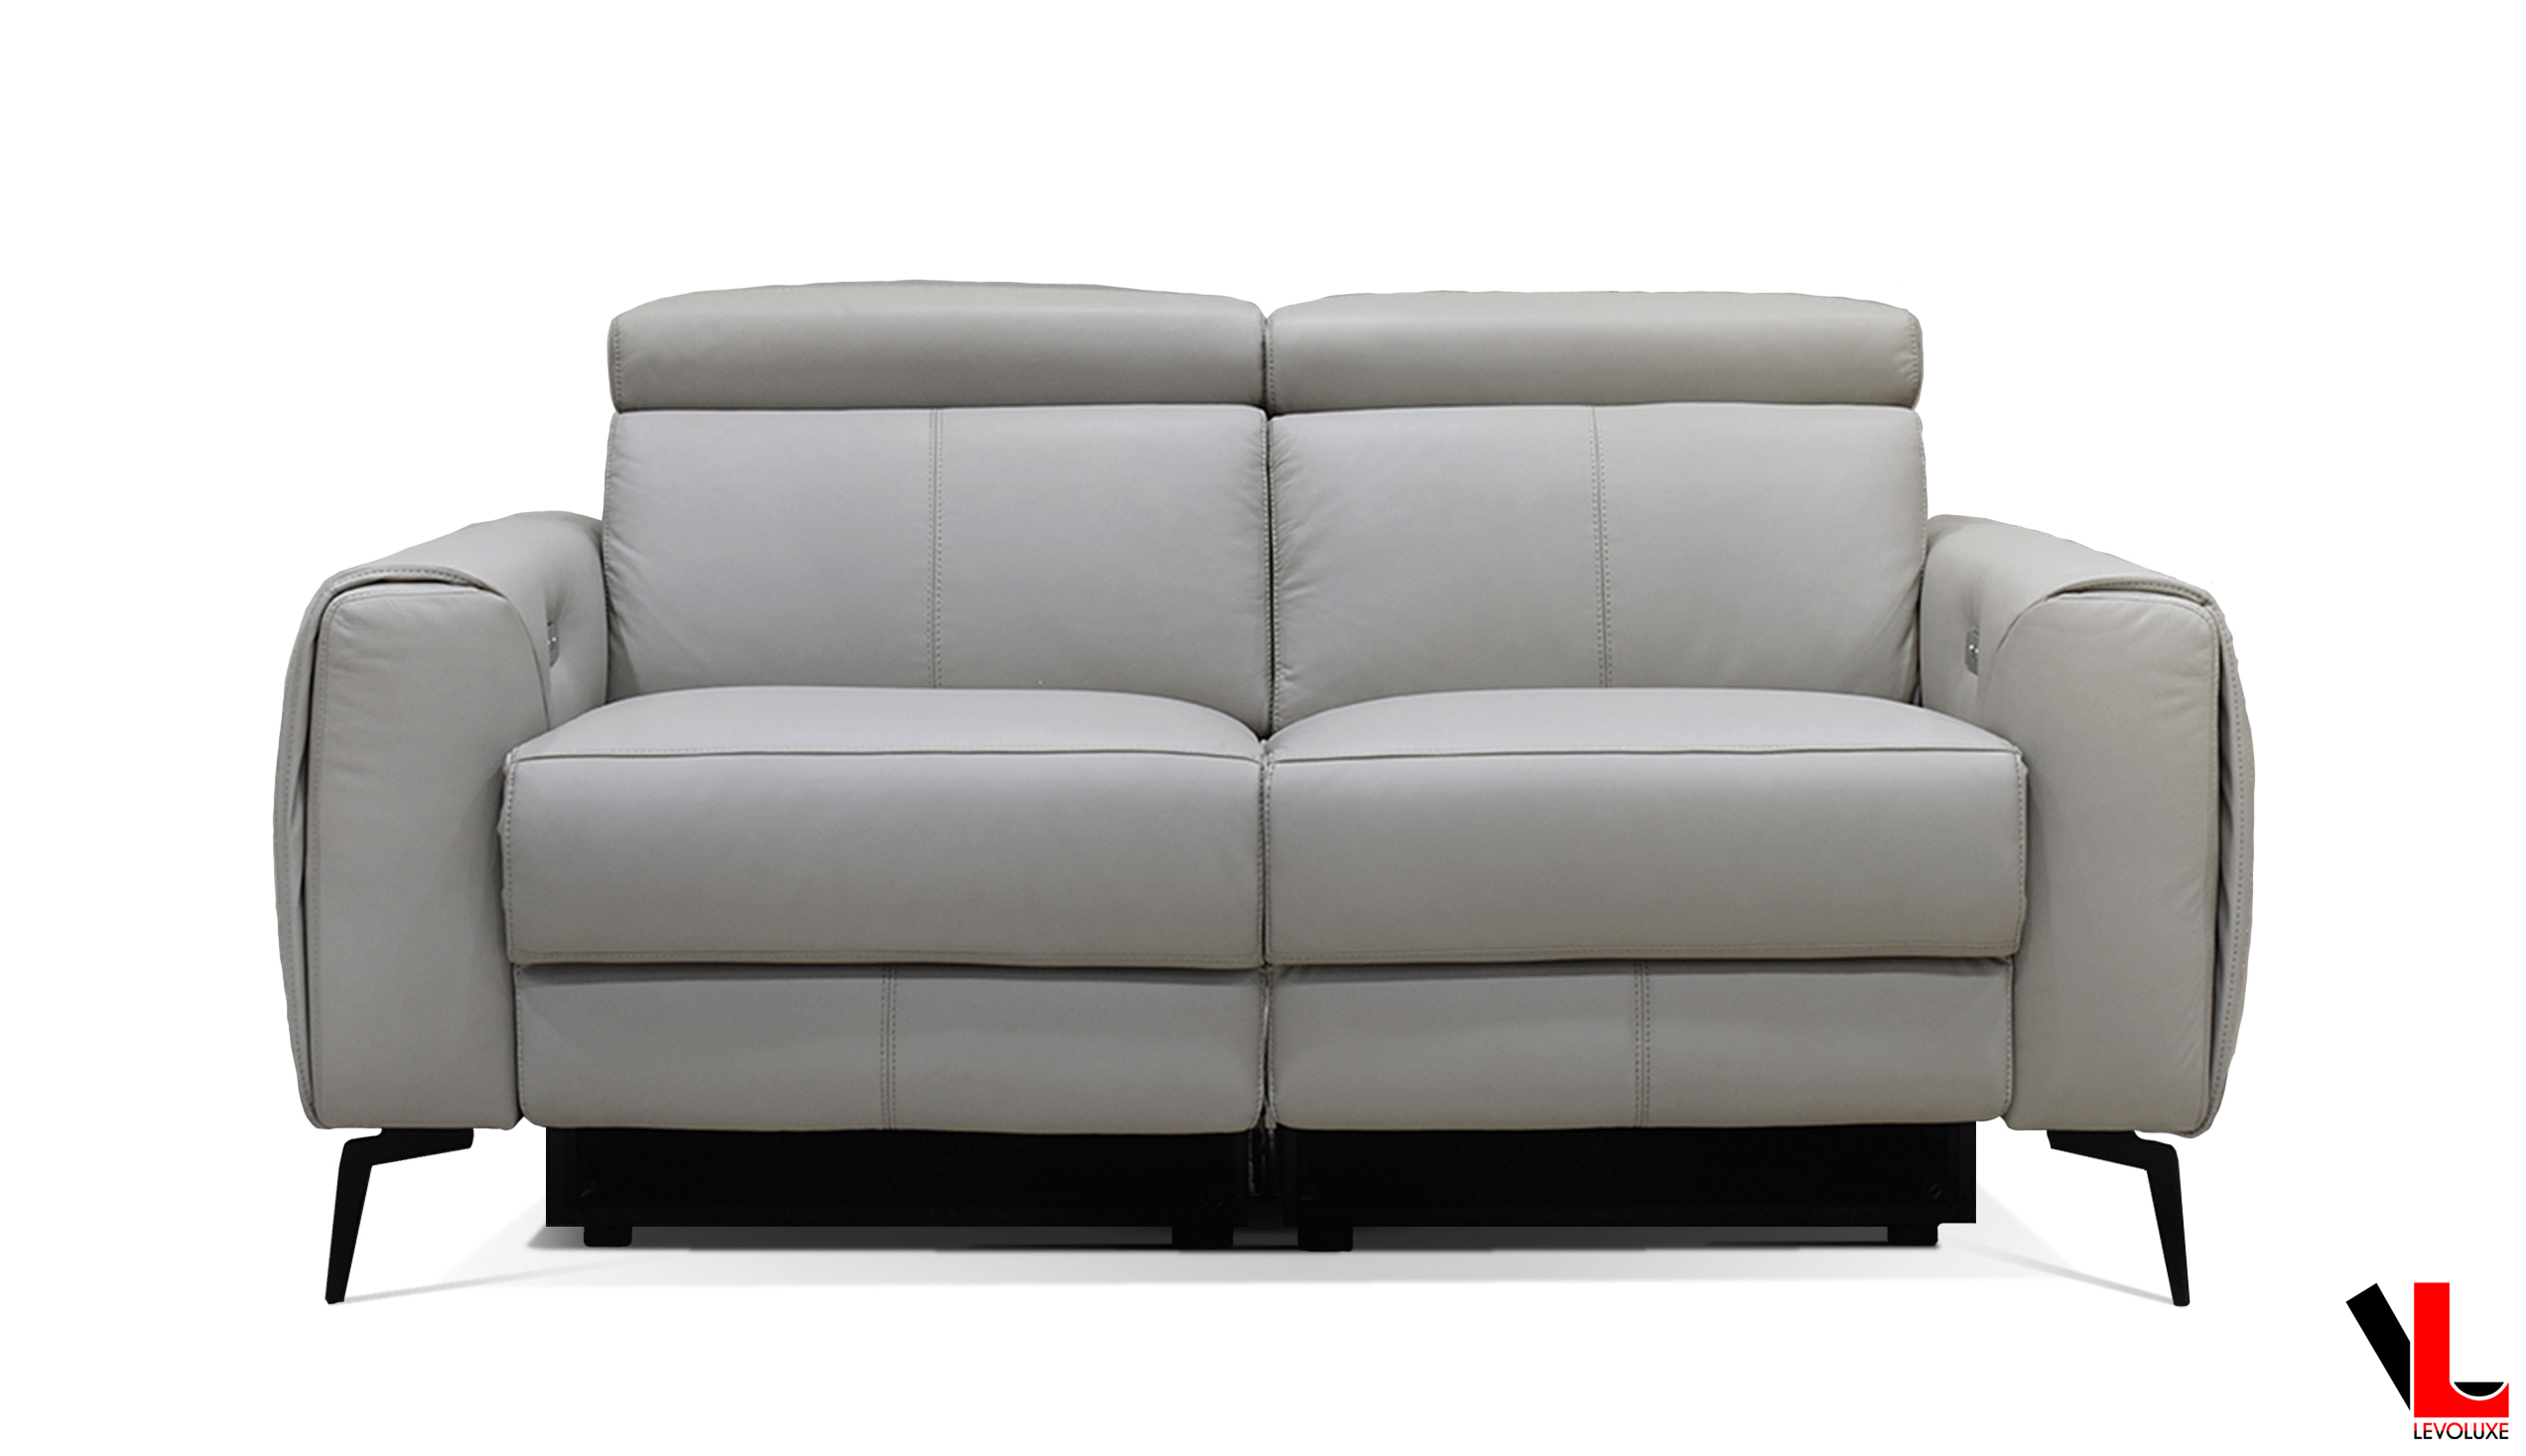 Levoluxe Lennox 67 Power Reclining Loveseat with Adjustable Headrest in  Light Grey Leather Match